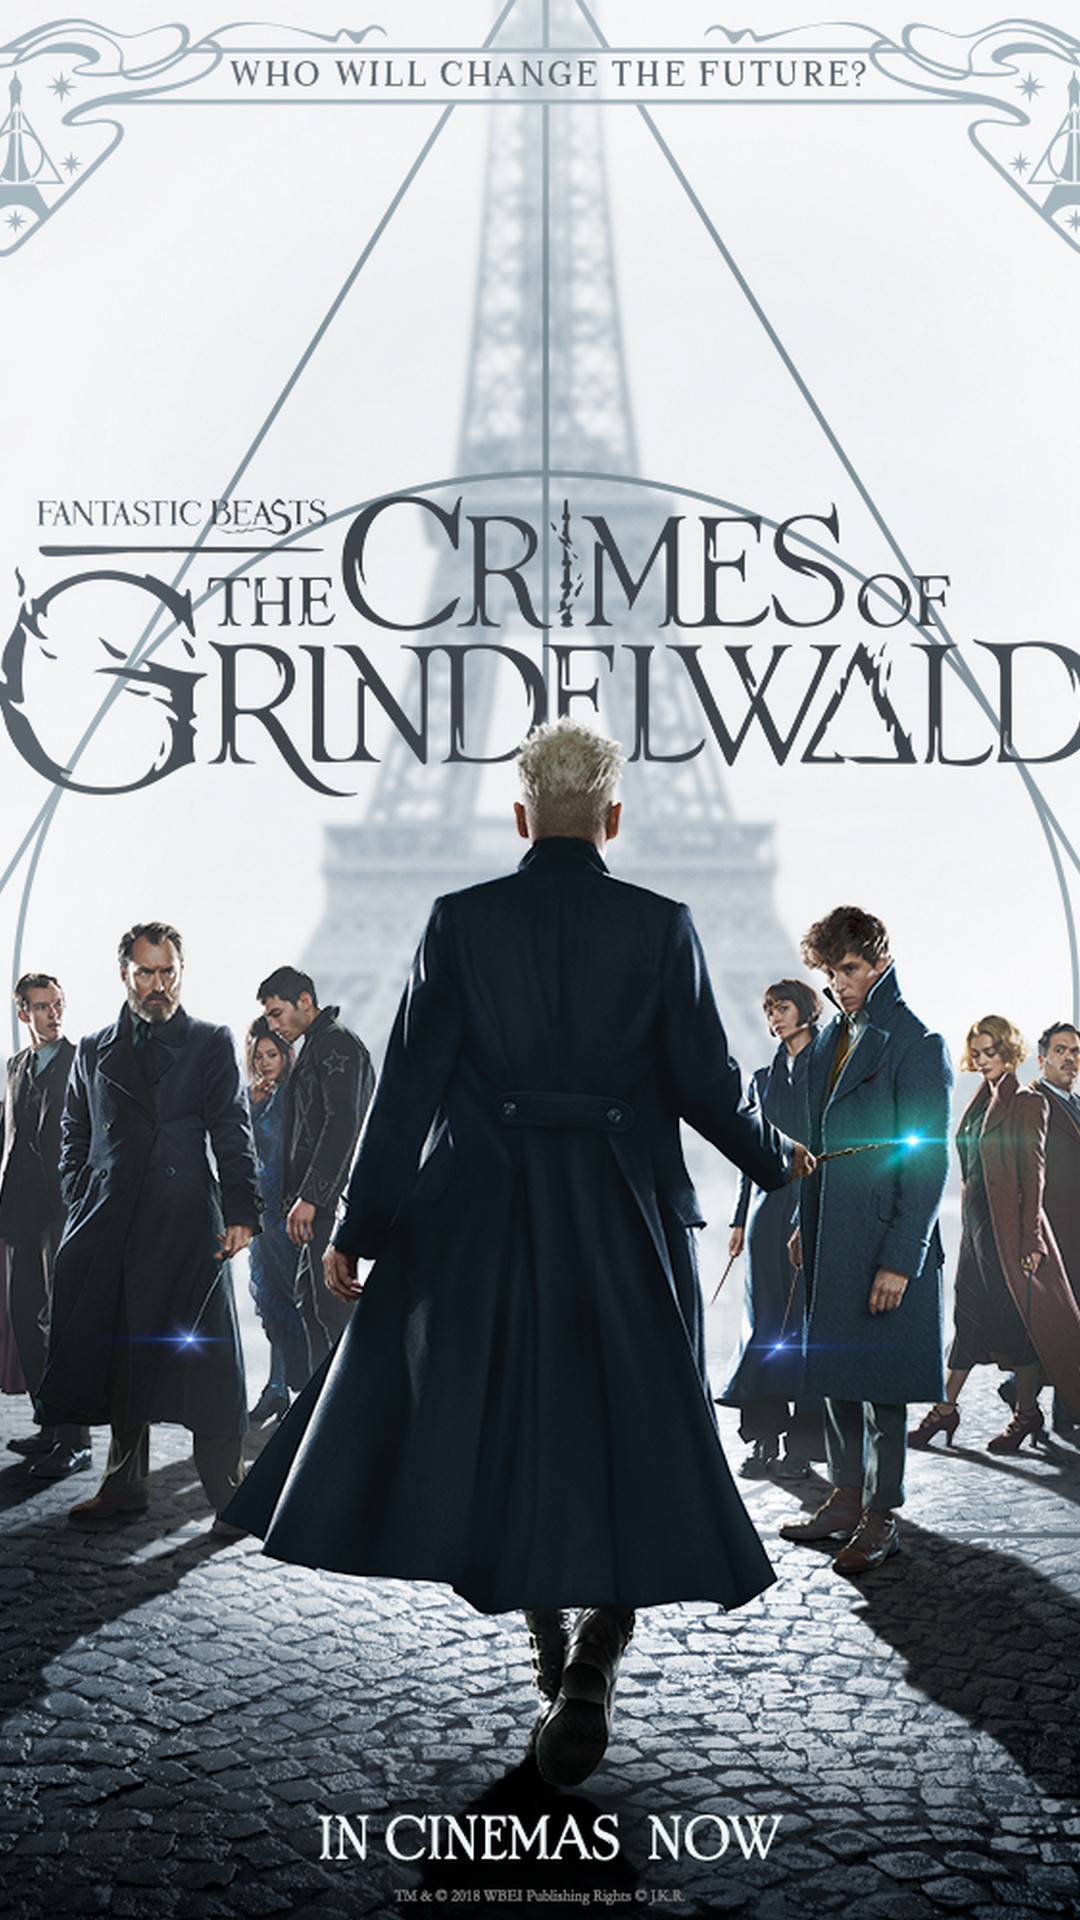 Fantastic Beasts The Crimes of Grindelwald Poster Movie With Resolution 1080X1920 pixel. You can make this wallpaper for your Mac or Windows Desktop Background, iPhone, Android or Tablet and another Smartphone device for free